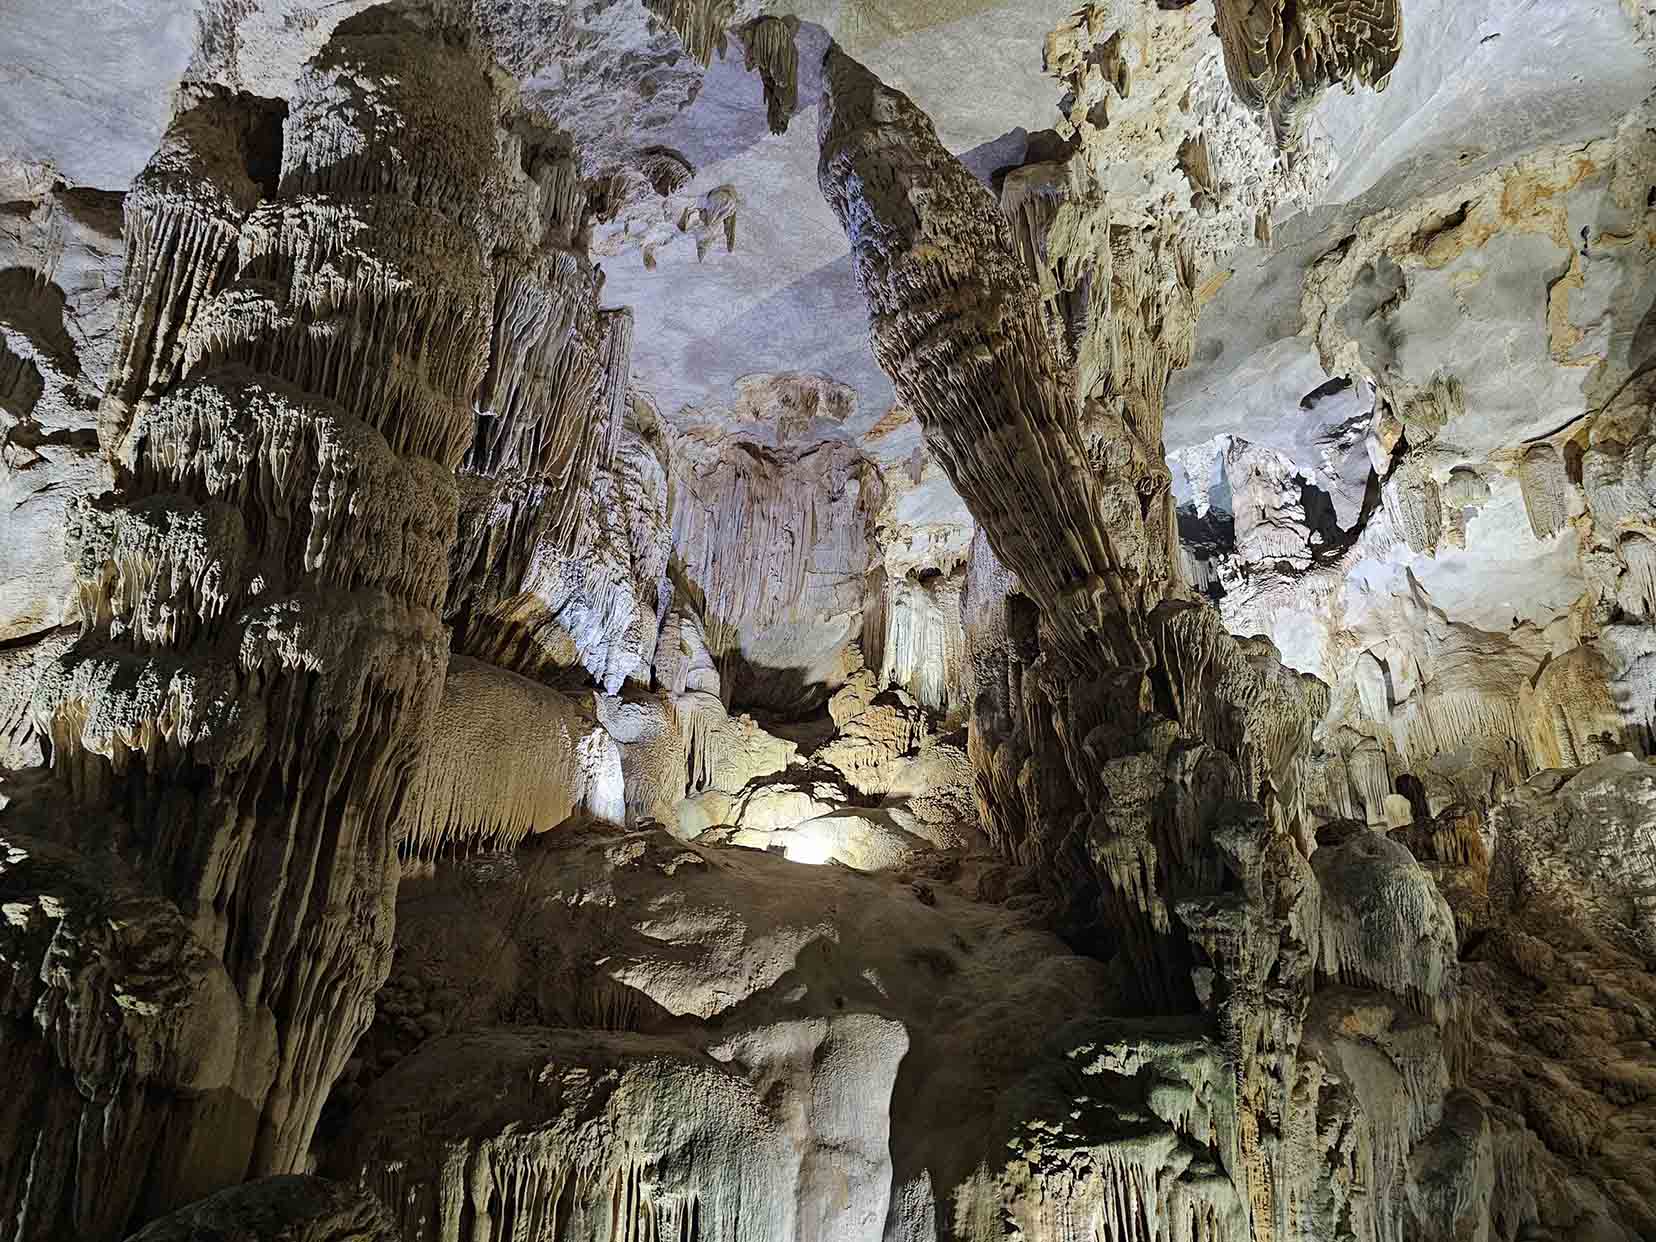 Exploring the stalactite castle in Quang Binh